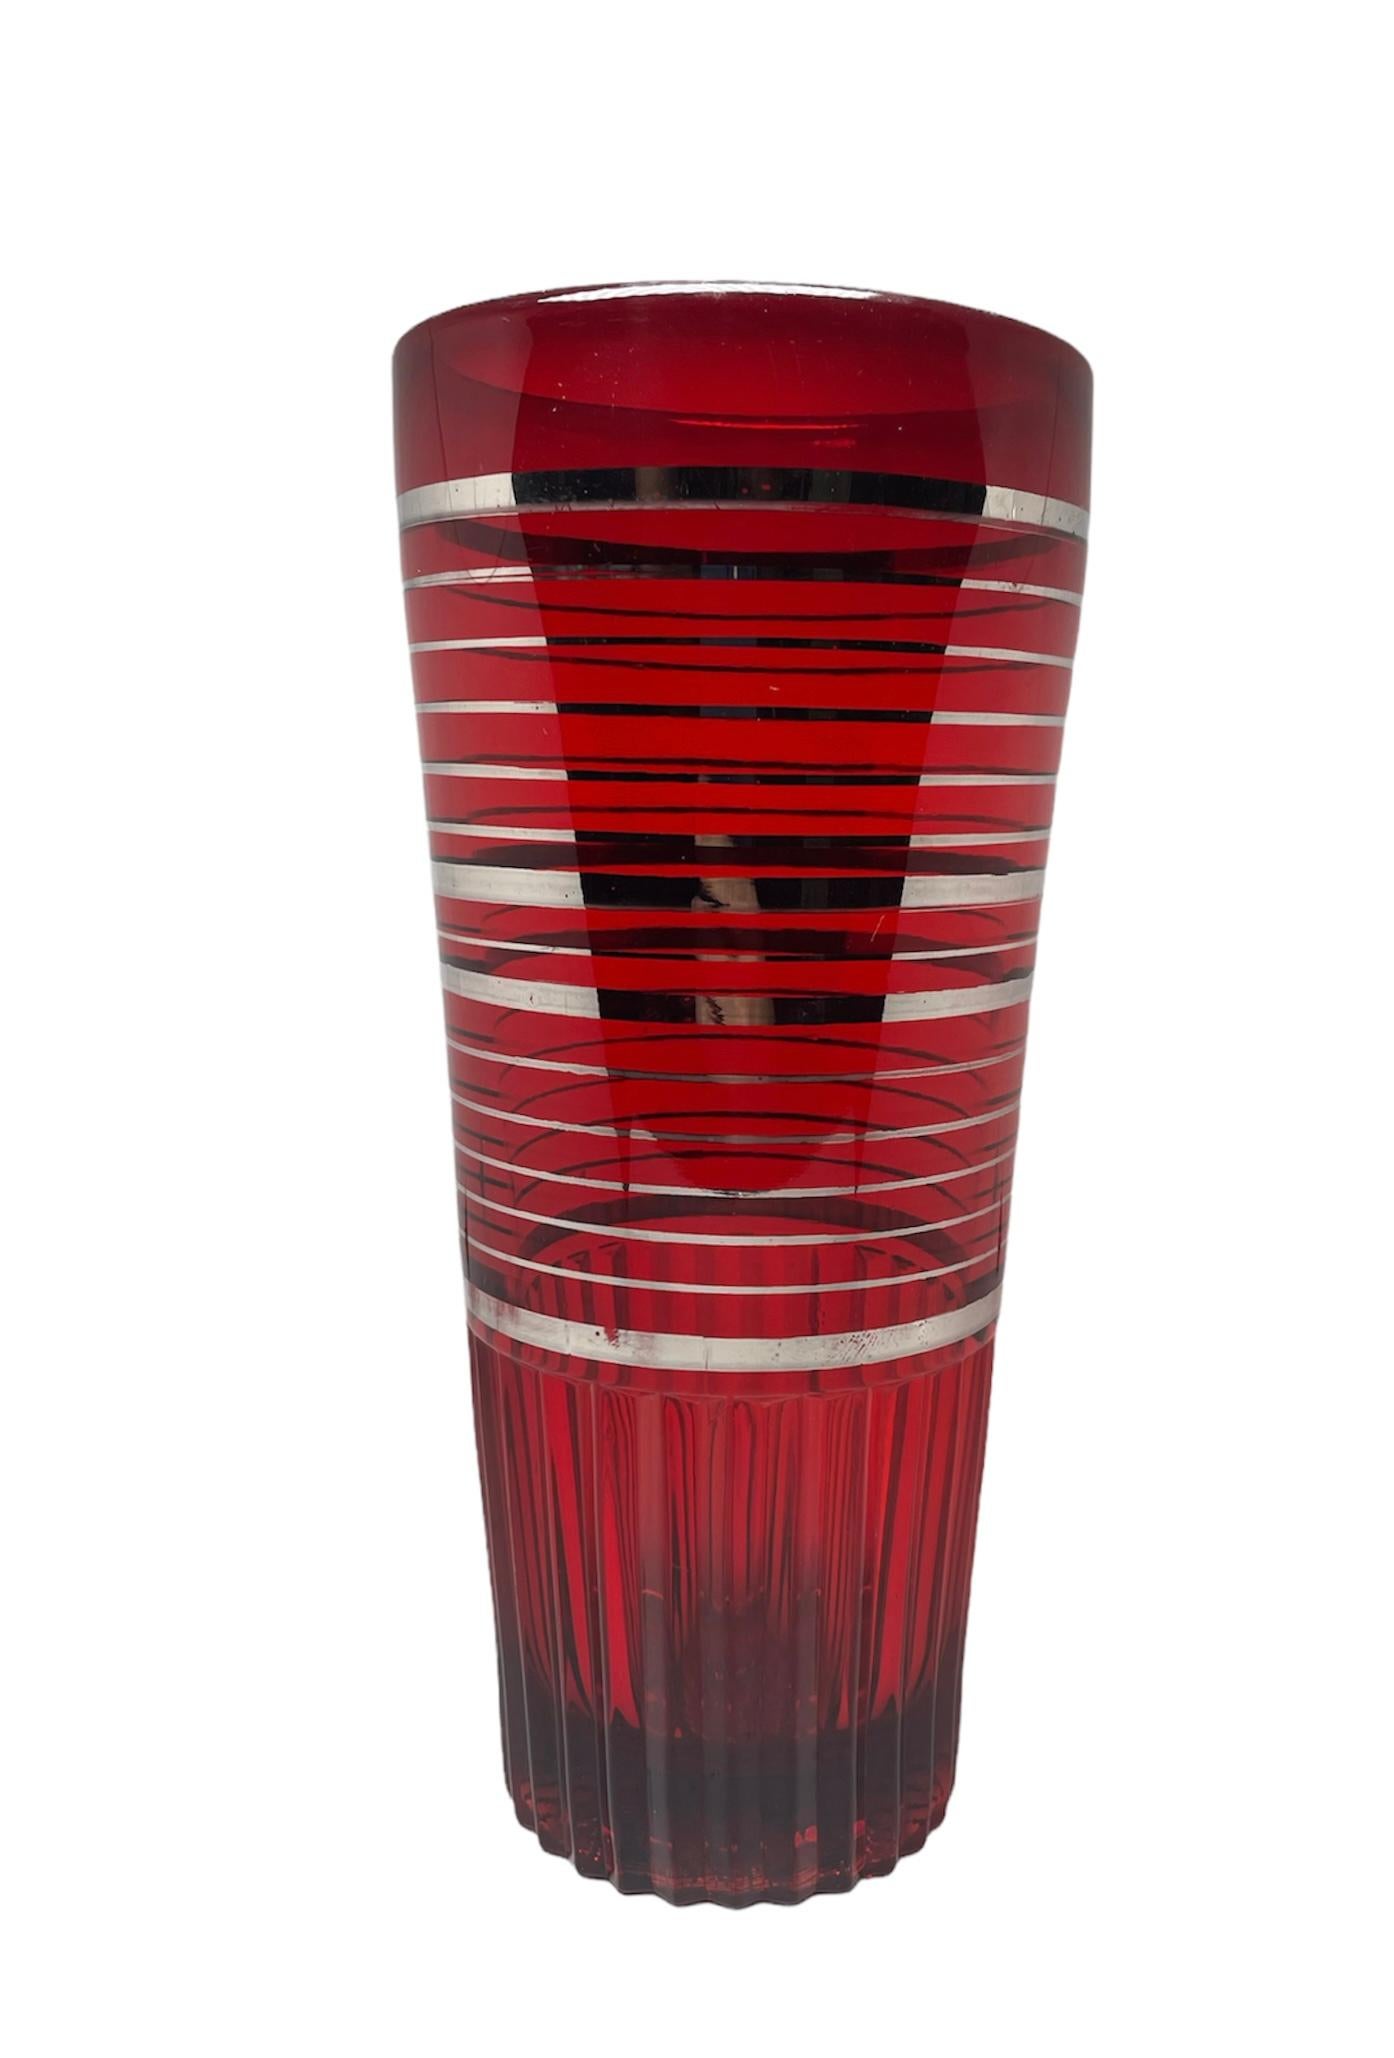 Set of Paden City Ruby Red Glass Cocktail Shaker and Glasses In Good Condition For Sale In Guaynabo, PR